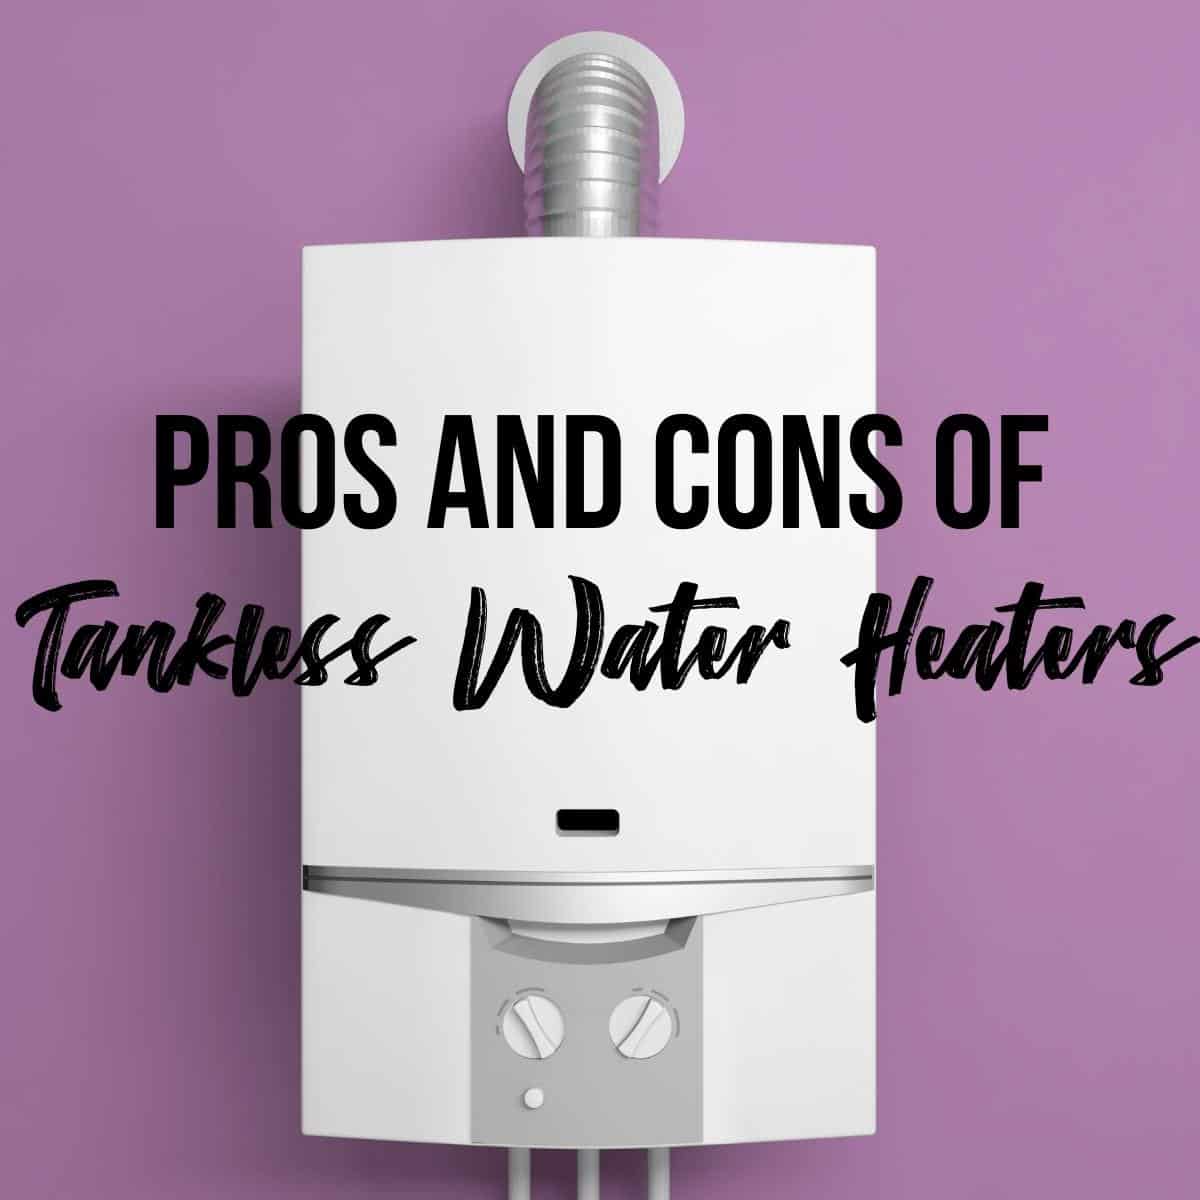 tankless water heater with text overlay "pros and cons of tankless water heaters"